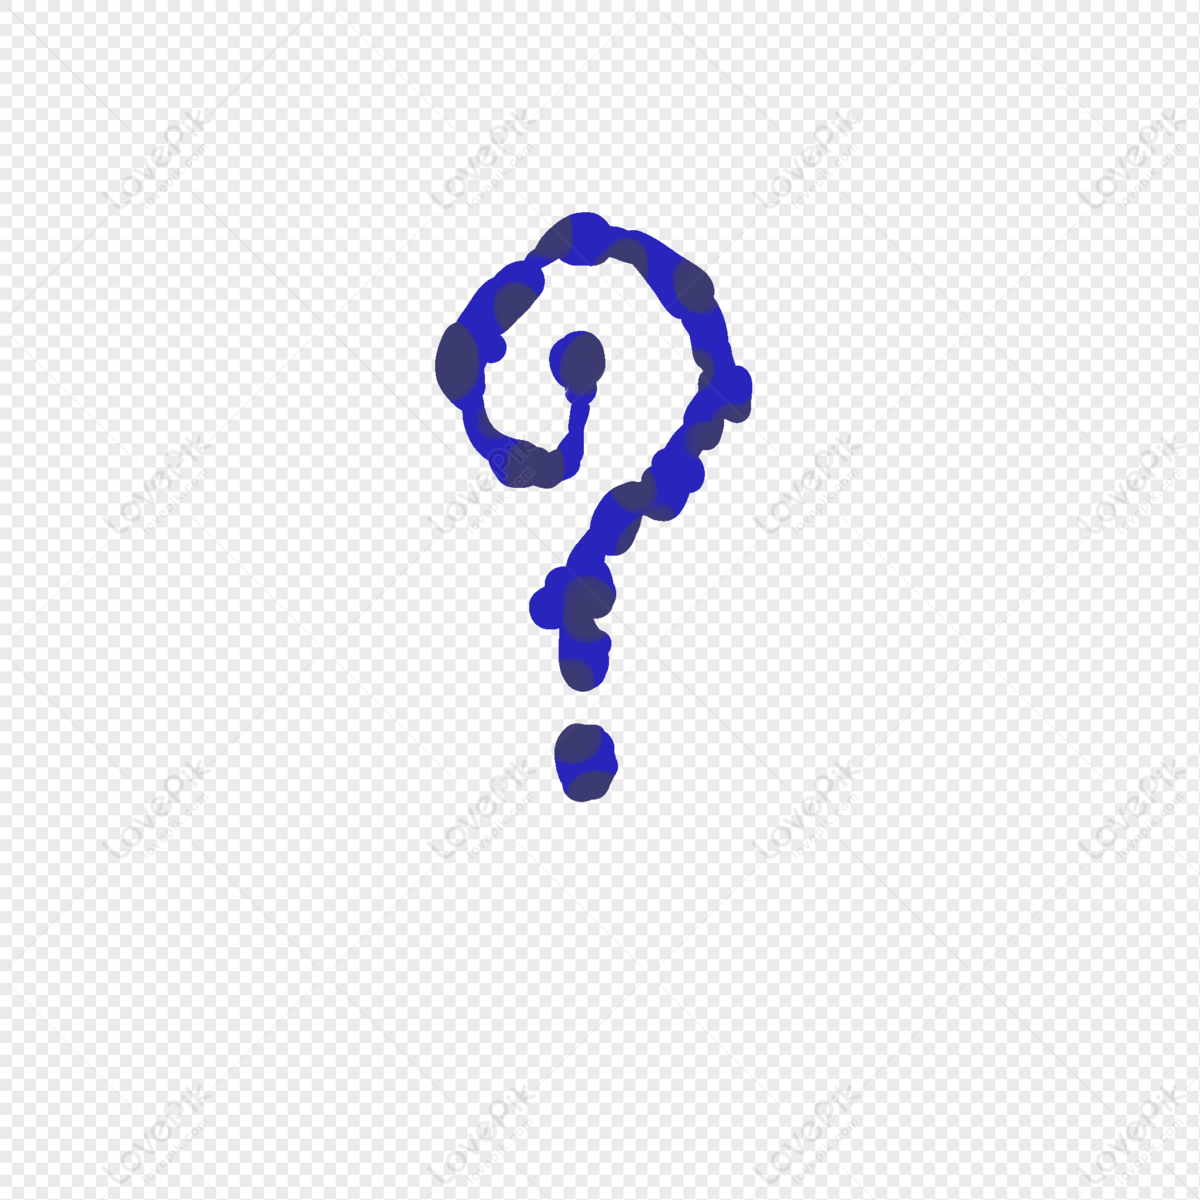 Blue Question Mark PNG Transparent Image And Clipart Image For Free  Download - Lovepik | 401172777